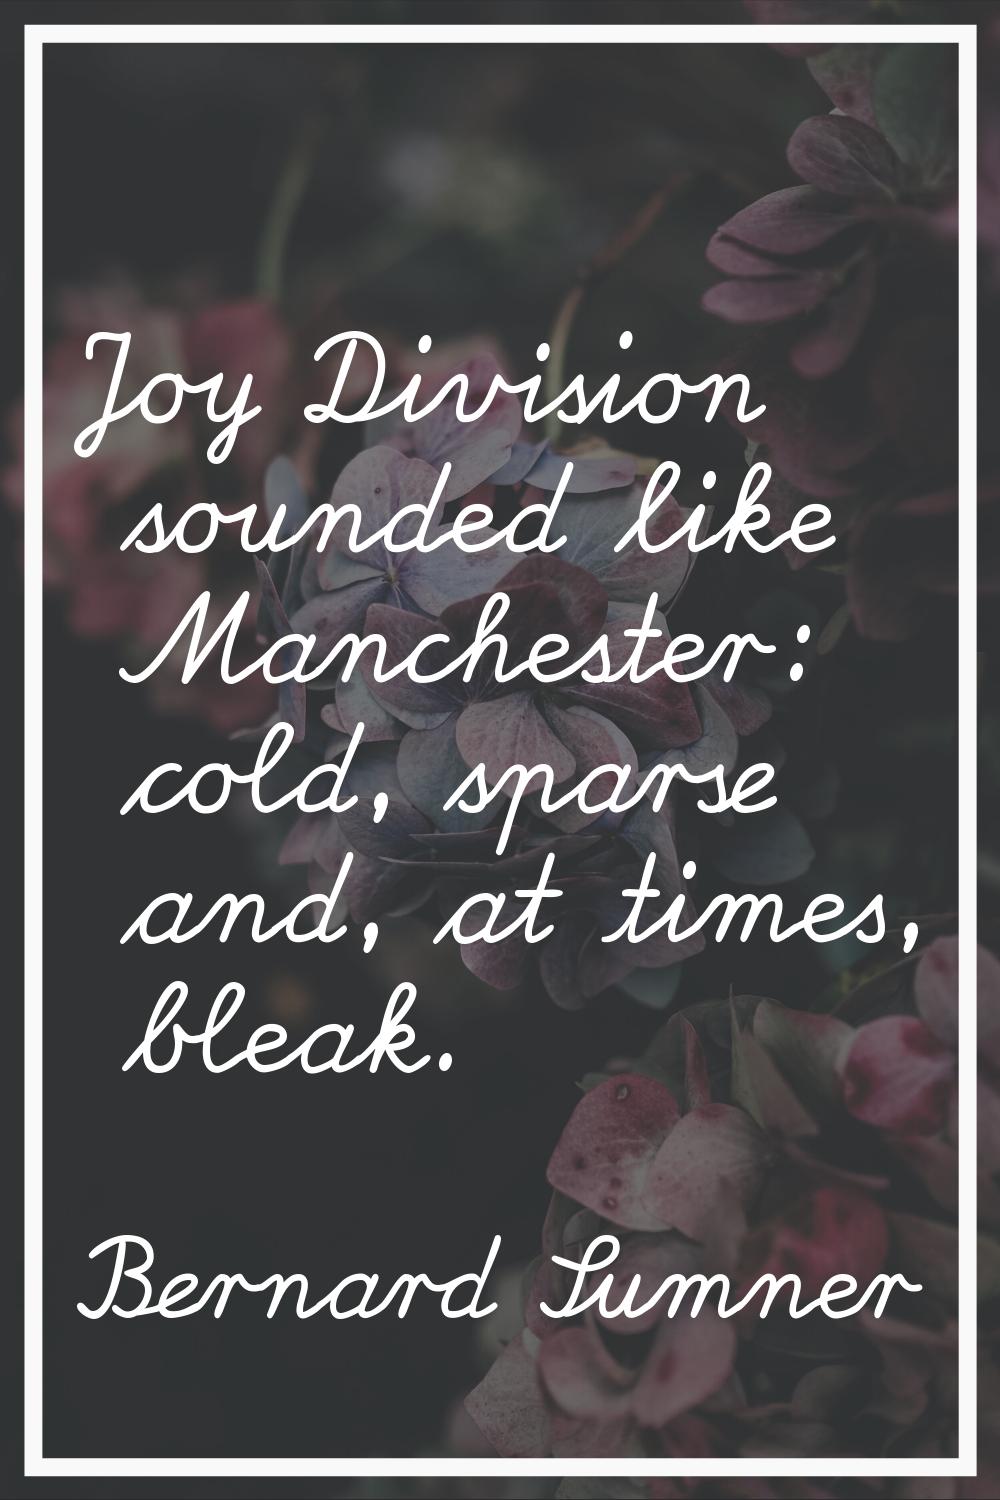 Joy Division sounded like Manchester: cold, sparse and, at times, bleak.